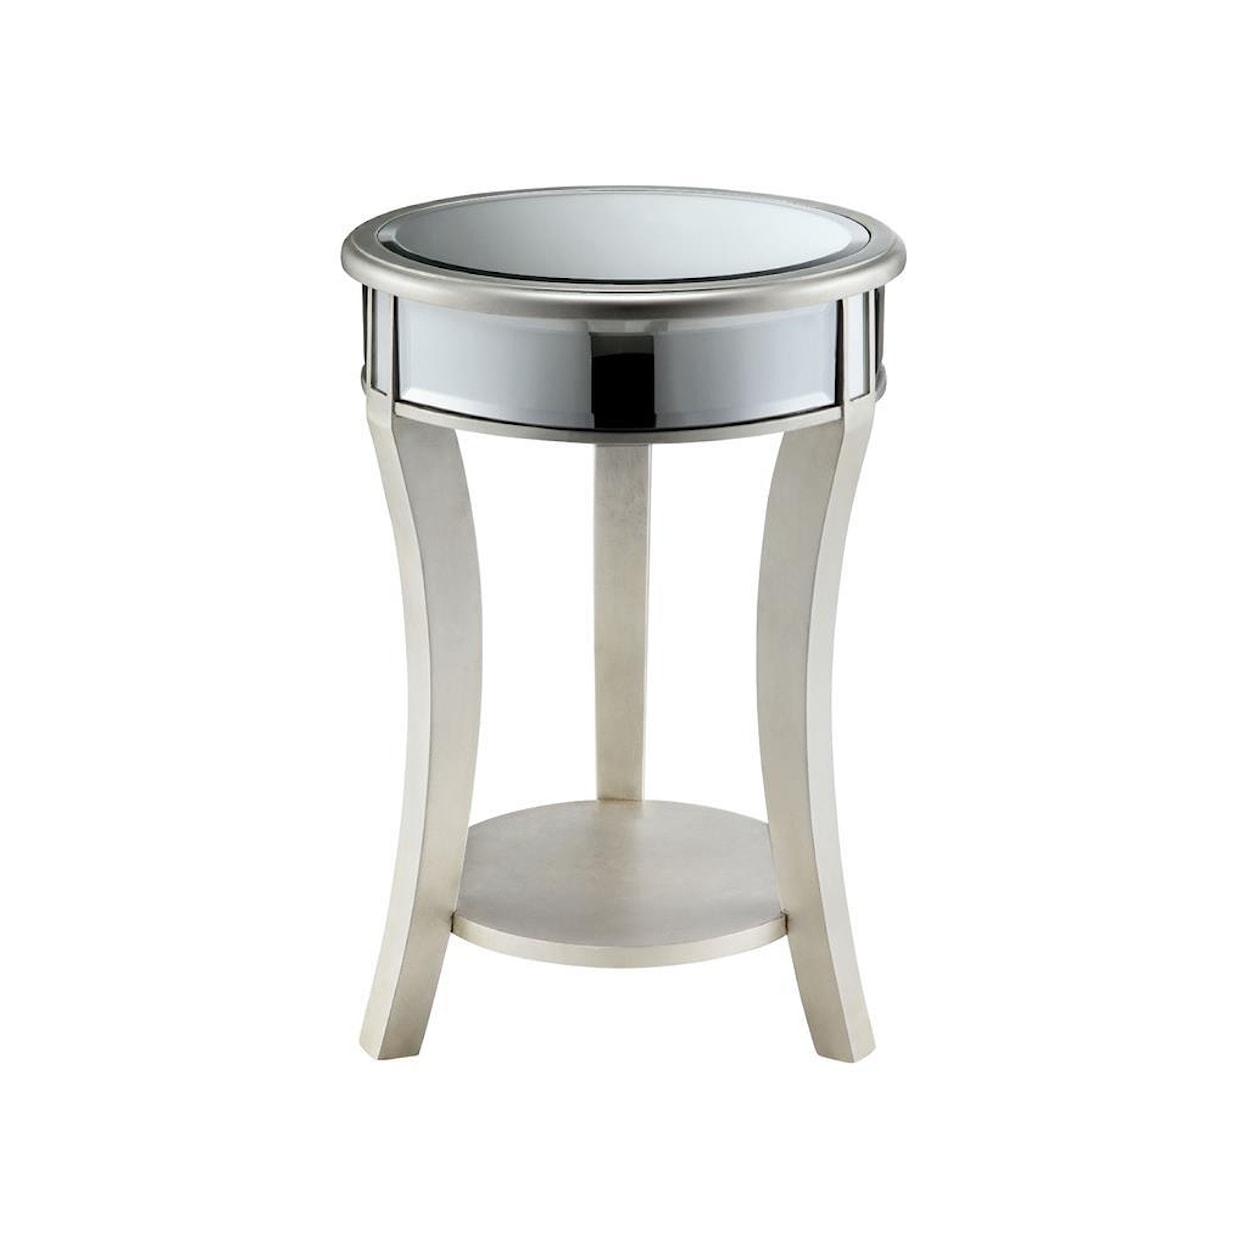 Stein World Accent Tables Mirrored Round Table